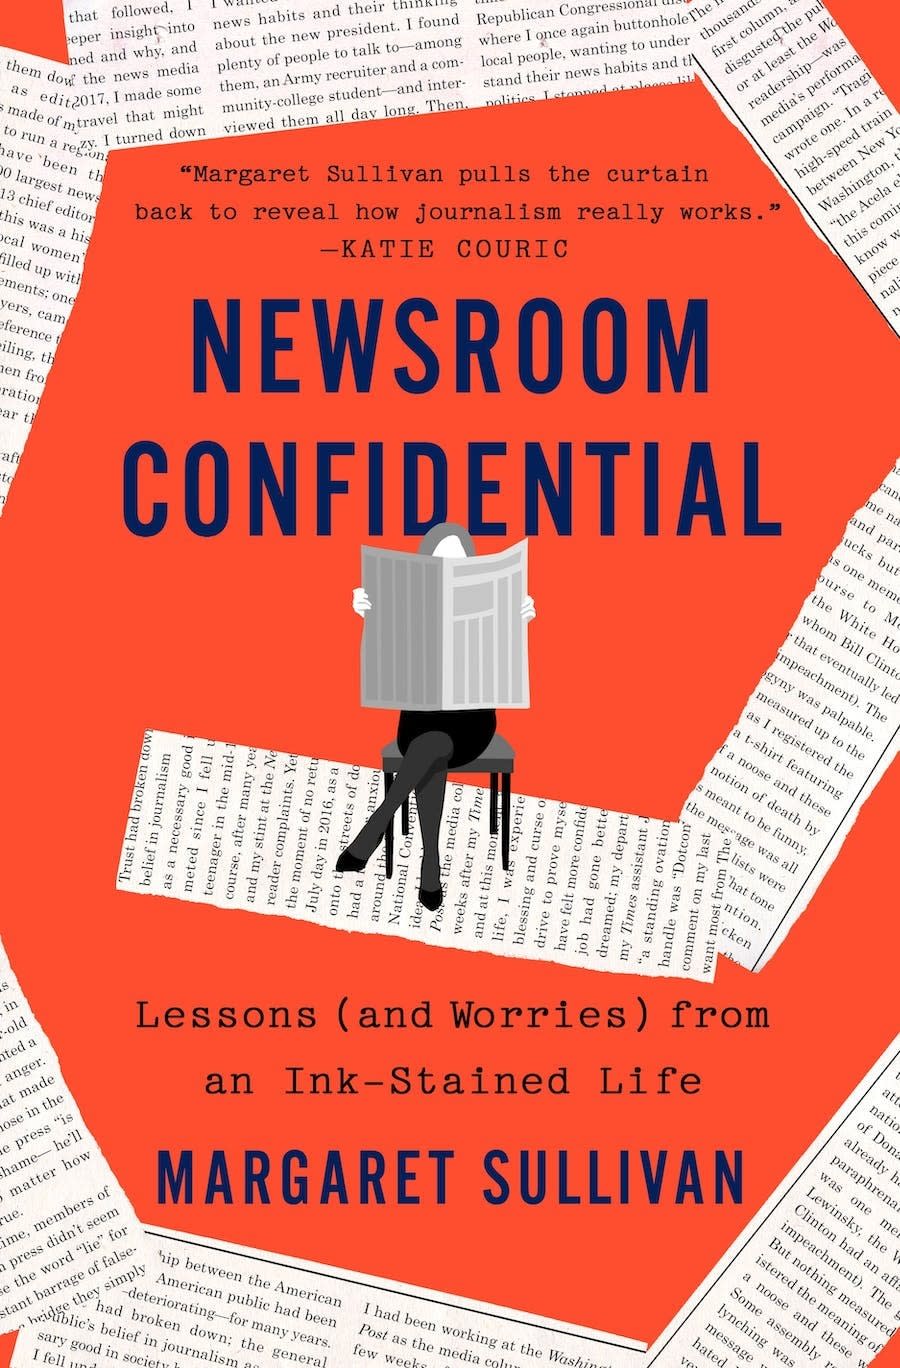 This cover image released by St. Martin's Press shows "Newsroom Confidential: Lessons (and Worries) from an Ink-Stained Life" by Margaret Sullivan. (St. Martin's Press via AP)